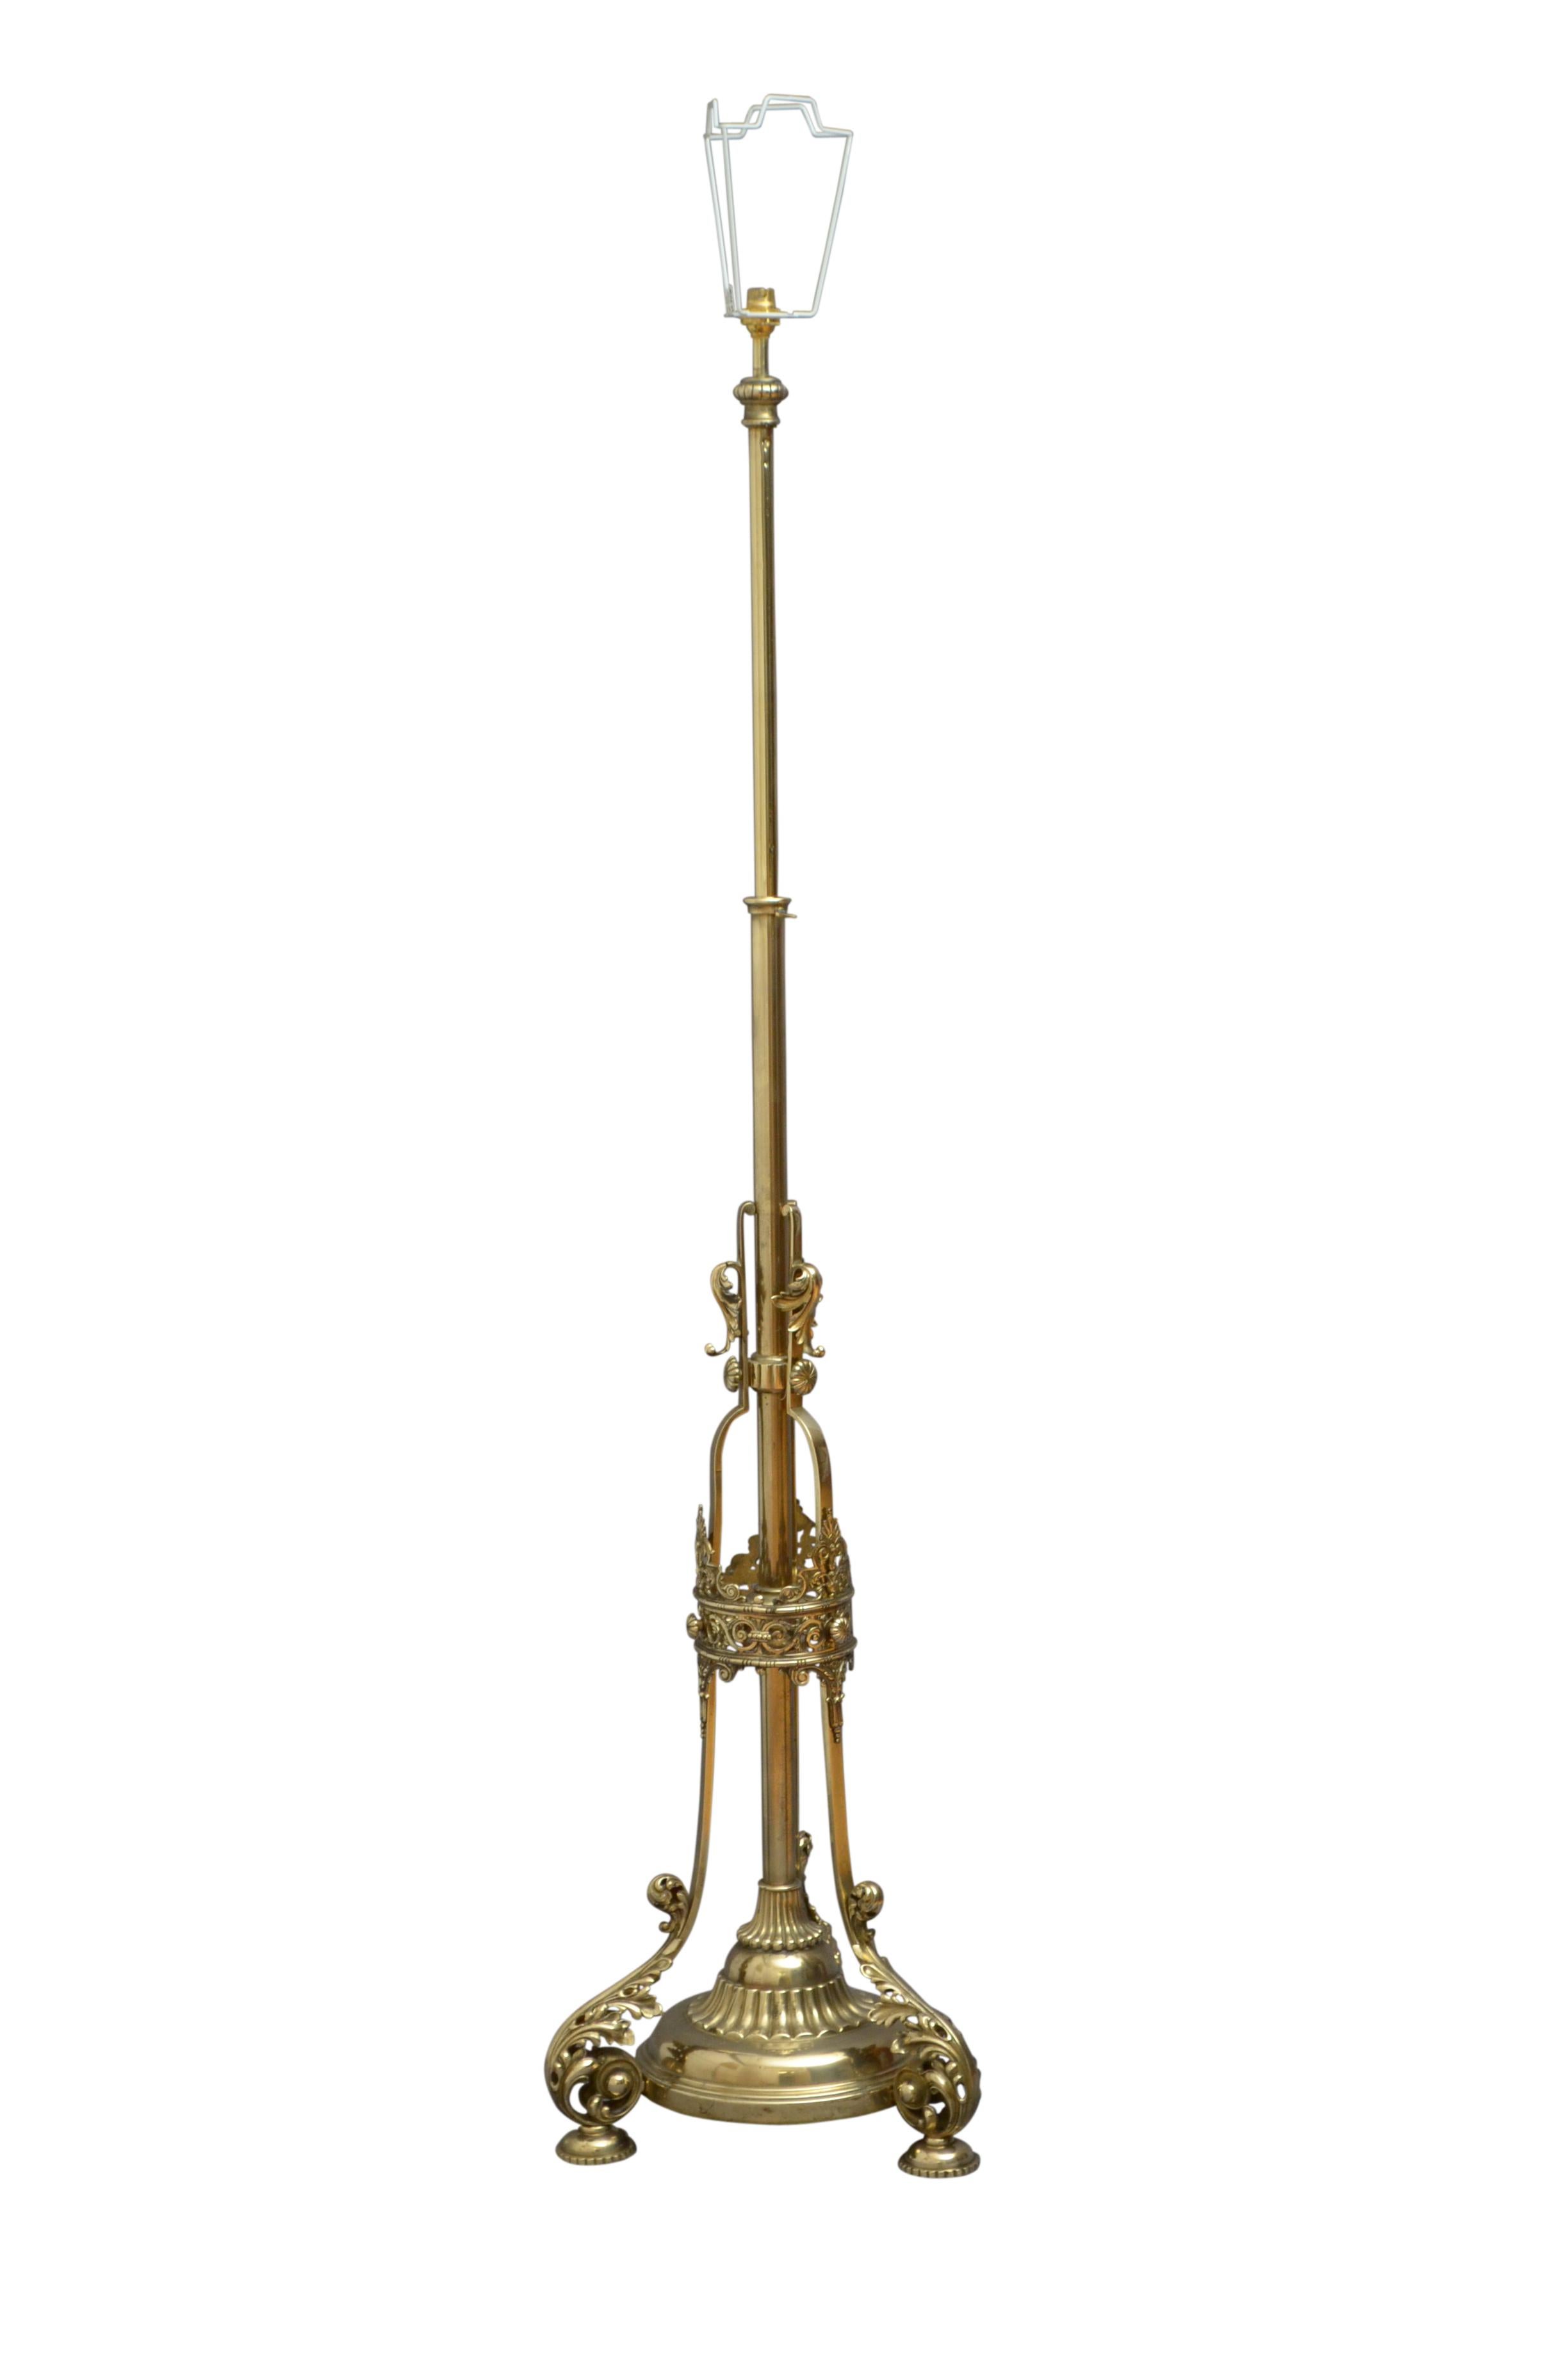 Outstanding Victorian height adjustable standard lamp, having extending column terminating in fluted circular base supported on three beautifully decorated uprights with acanthus leaves united by fretwork crown, all standing on leafy scrolls